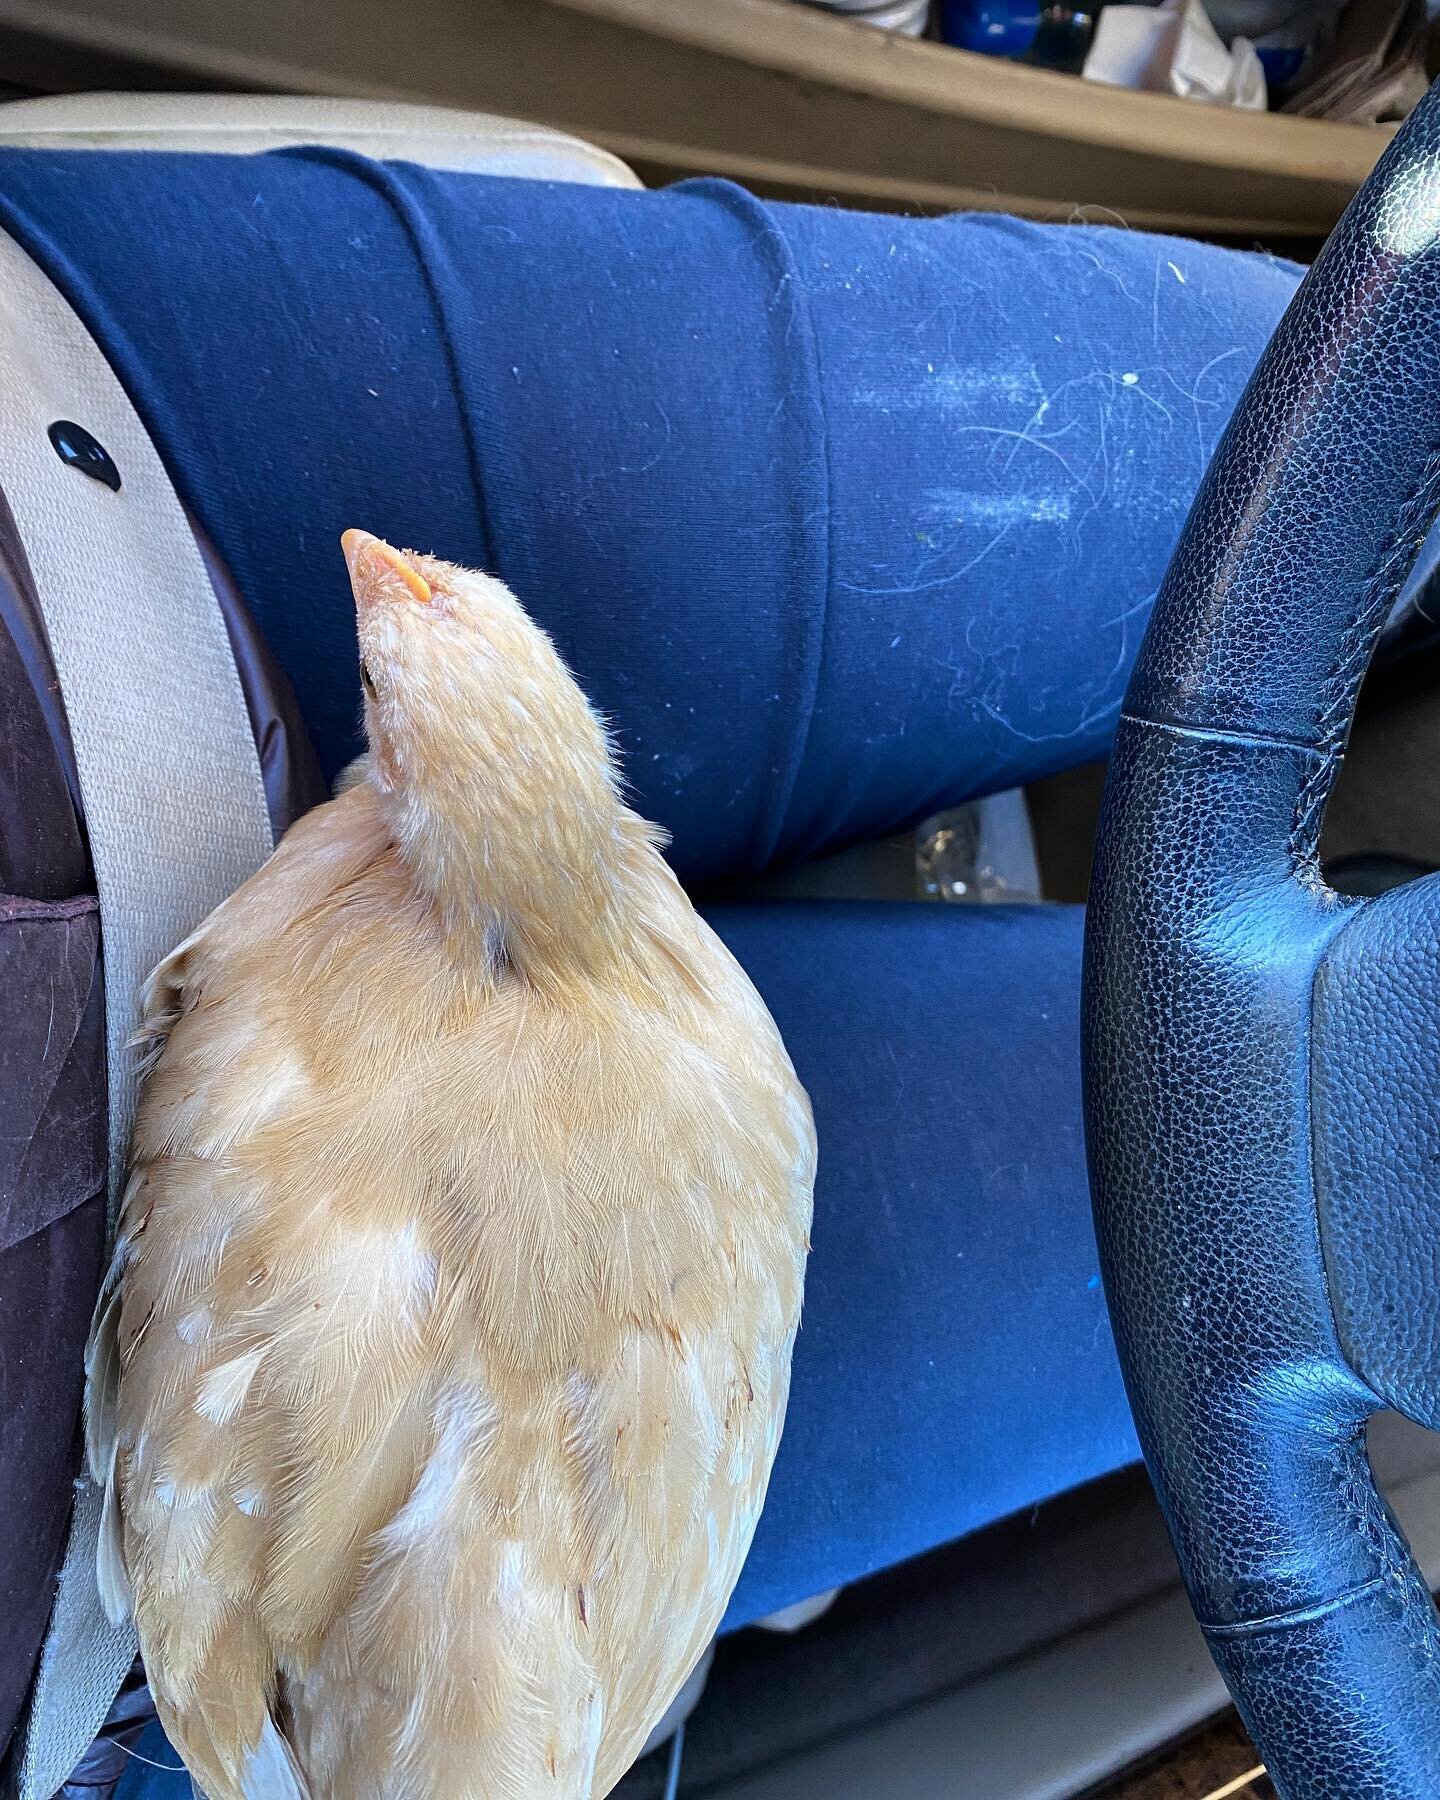 I guess I did not realize it was take your chicken to work day 😄 my daughter has fallen in love with this chick that absolutely loves her. She was living at @rubyranchnc where they started their relationship but now she will live with us in town. Be